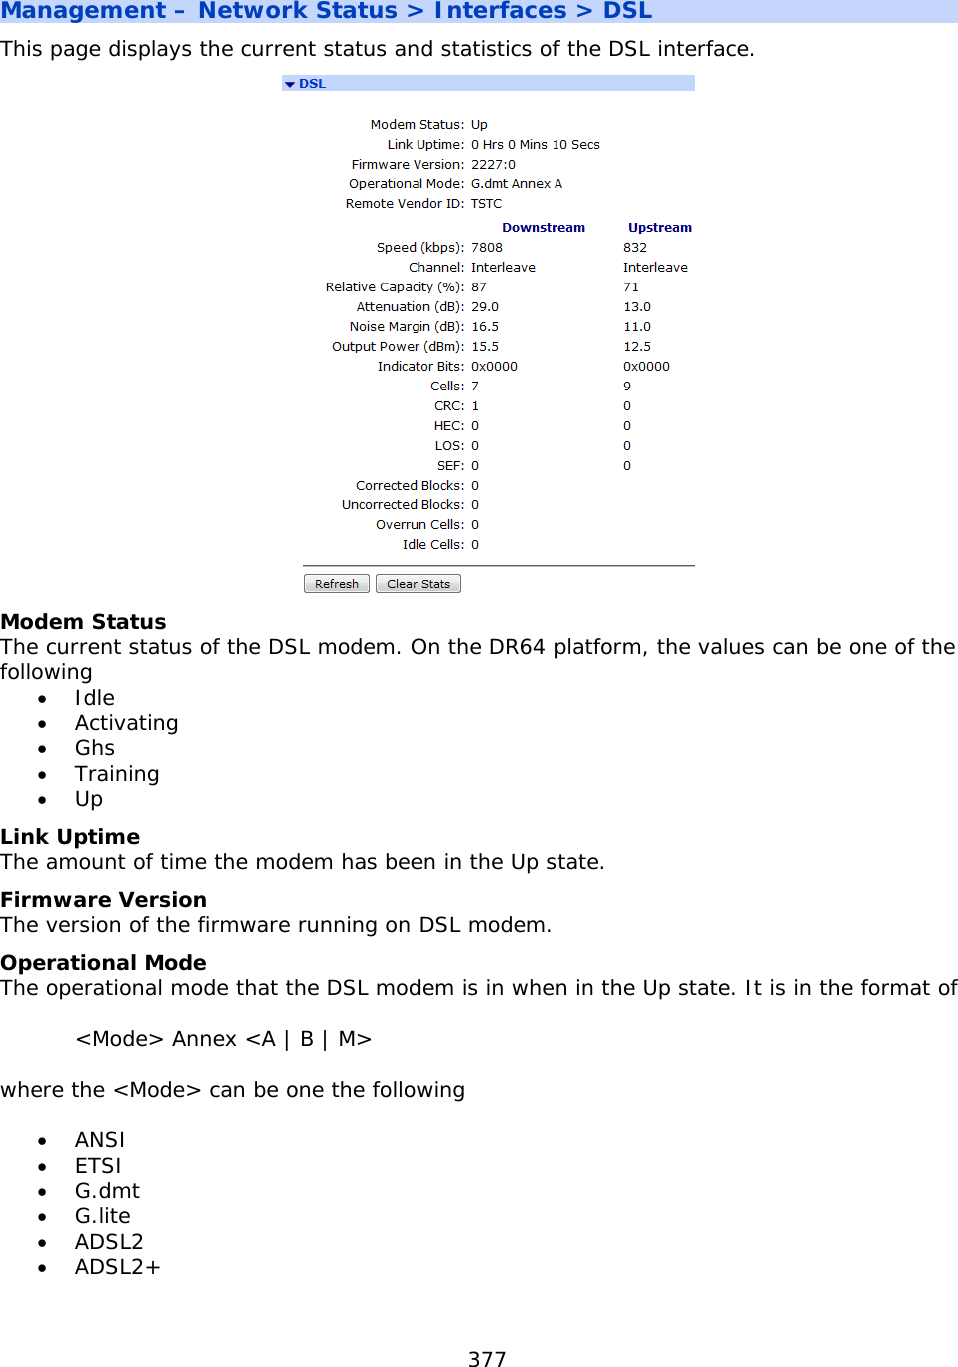 377  Management – Network Status &gt; Interfaces &gt; DSL This page displays the current status and statistics of the DSL interface.  Modem Status The current status of the DSL modem. On the DR64 platform, the values can be one of the following • Idle  • Activating • Ghs • Training • Up Link Uptime The amount of time the modem has been in the Up state. Firmware Version The version of the firmware running on DSL modem. Operational Mode The operational mode that the DSL modem is in when in the Up state. It is in the format of   &lt;Mode&gt; Annex &lt;A | B | M&gt;  where the &lt;Mode&gt; can be one the following  • ANSI • ETSI • G.dmt • G.lite • ADSL2 • ADSL2+    